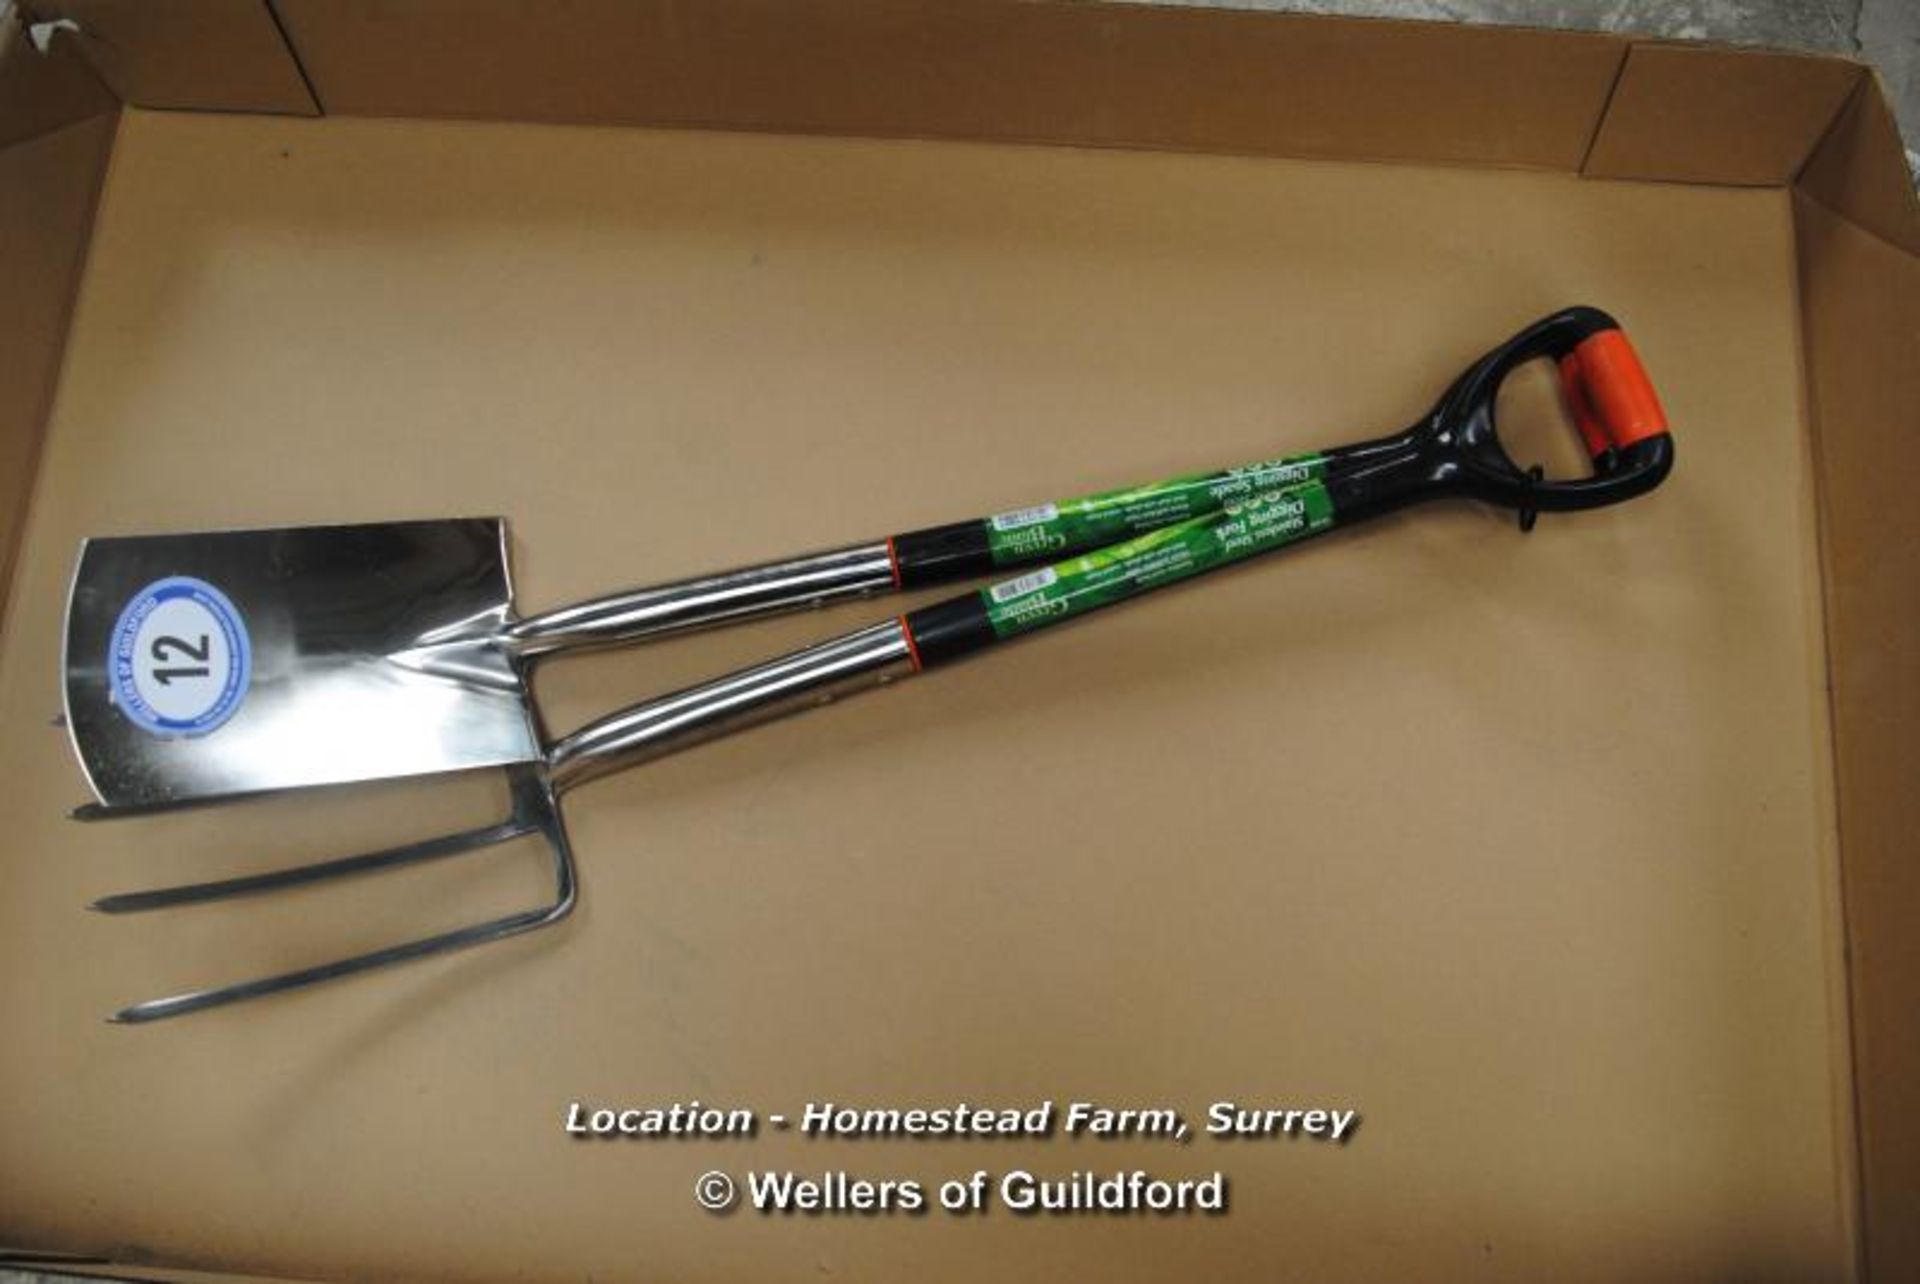 *NEW GREENBLADE STAINLESS STEEL DIGGING FORK AND SPADE SET [LOCATION: HOMESTEAD FARM - CALL THE